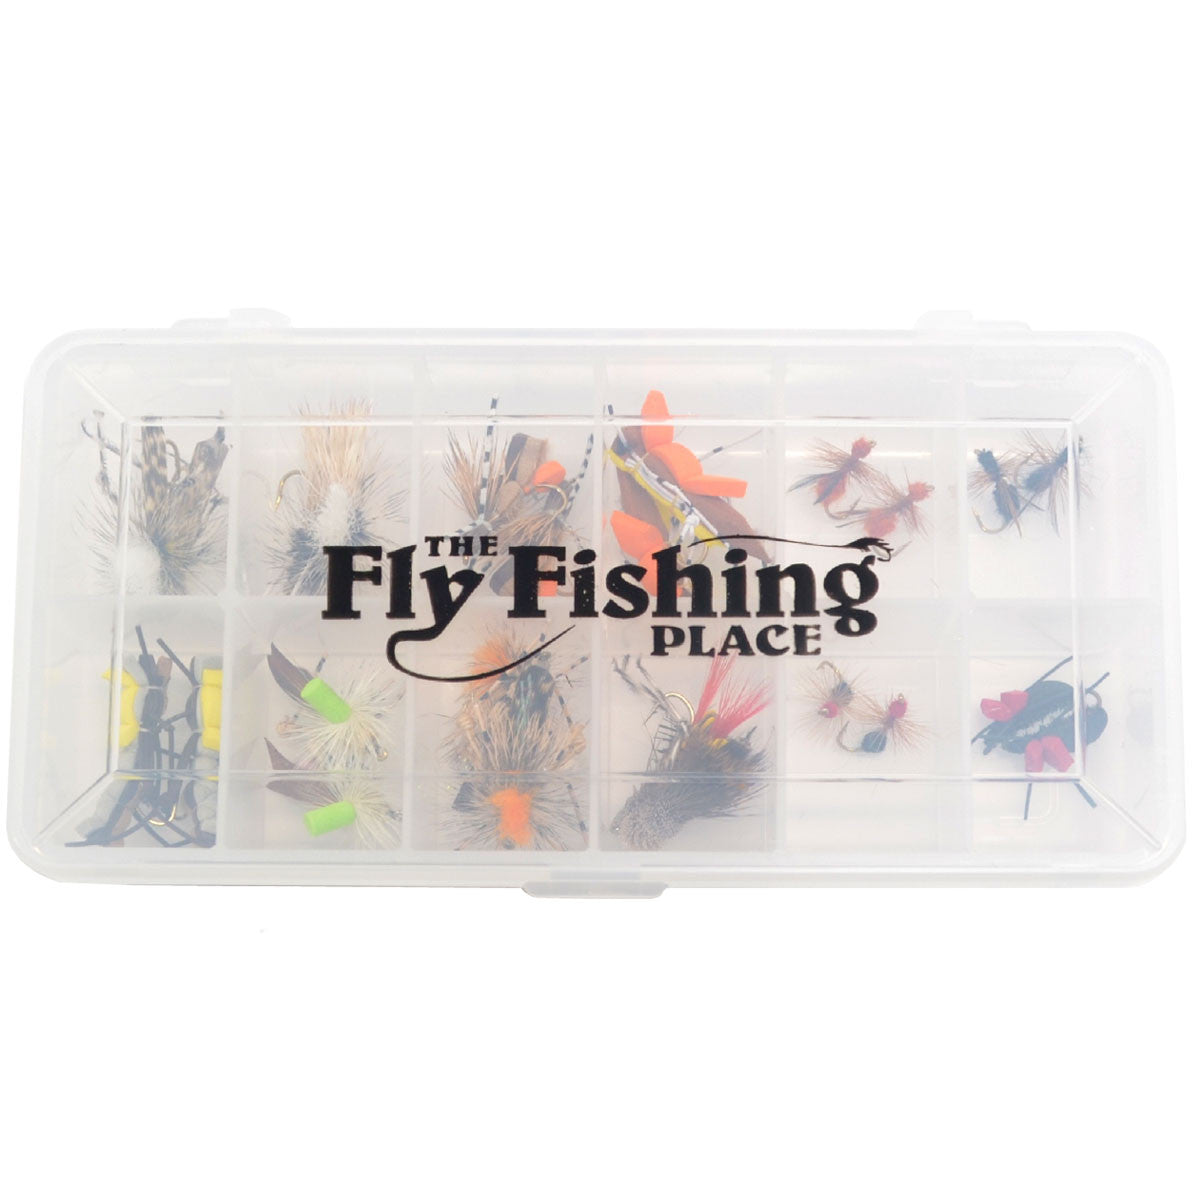 Trout Fly Assortment - Essential Terrestrials Fly Fishing Flies Collection - Includes Foam Hoppers, Ants, Beetles, and Cicadas - 2 Dozen Trout Flies with Fly Box